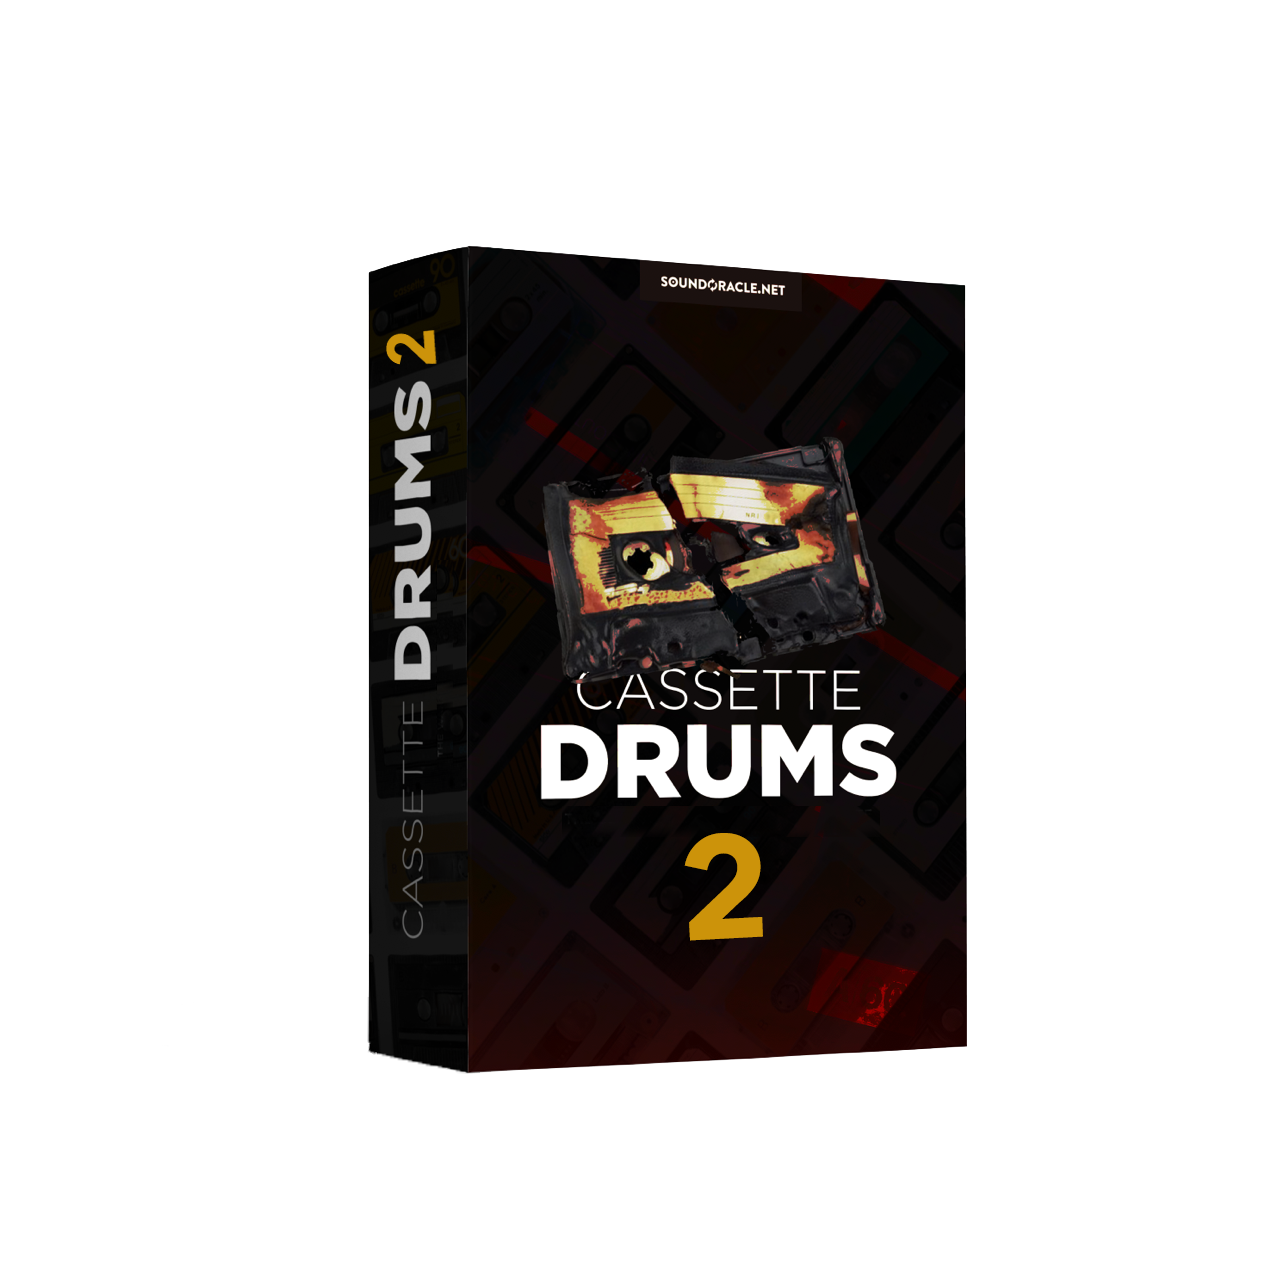 Cassette Drums 2 - SoundOracle Drum sample pack + Percussion Loops + Midi Chord Progression Pack